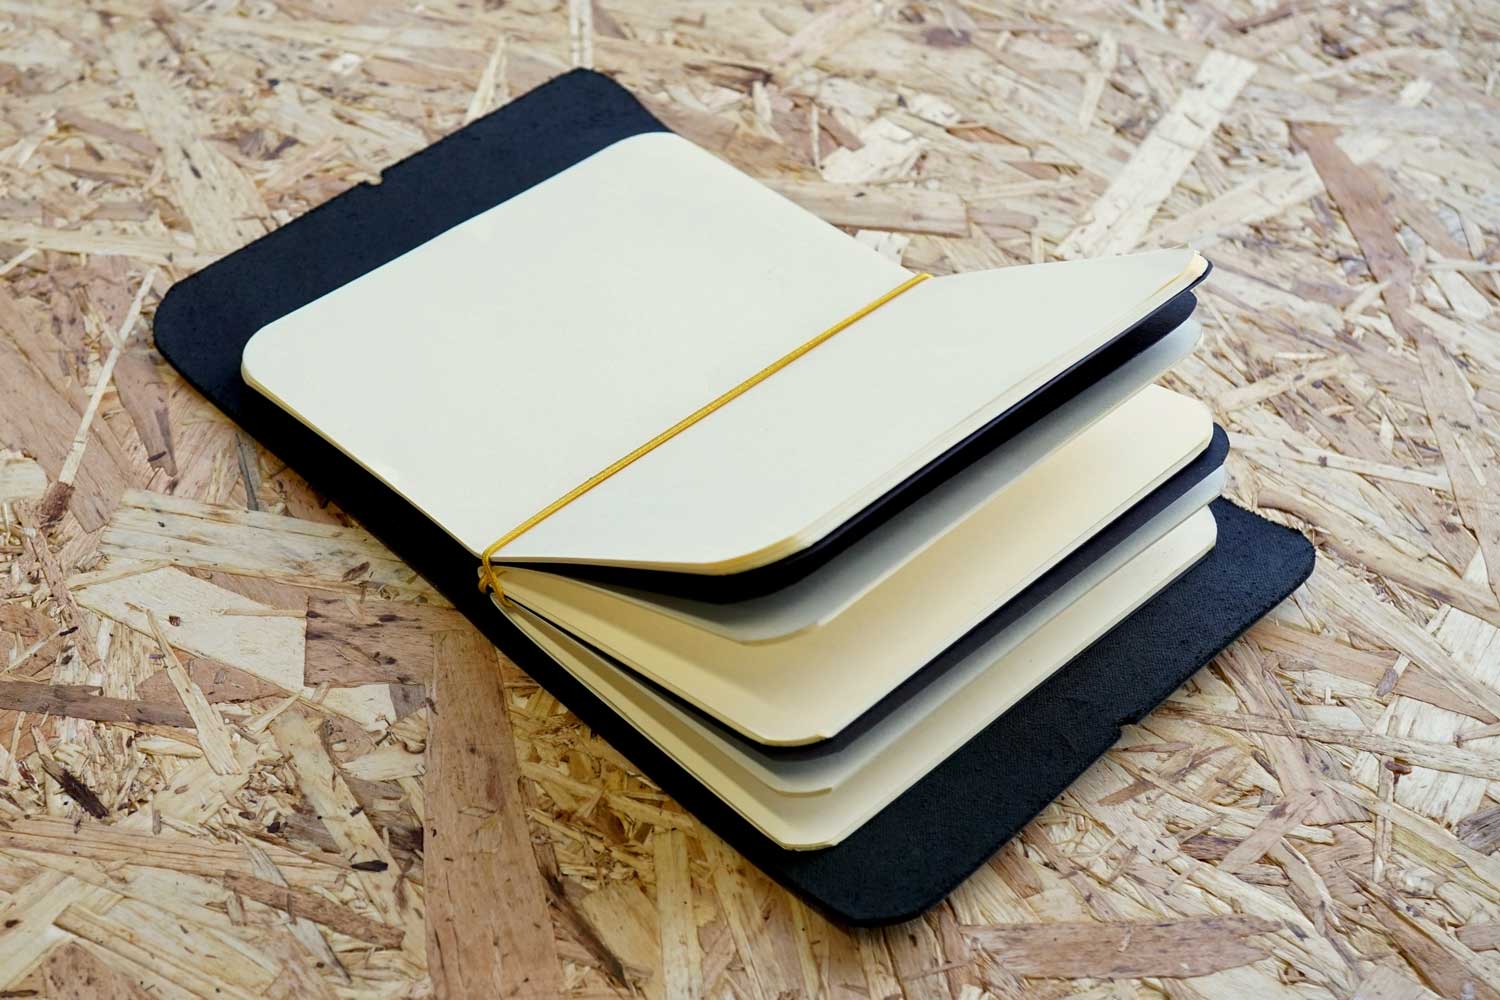 Never-ending journal, Explore. Dream. Discover; A6 leather travel journal with gold foiled compass on the cover with blank pages